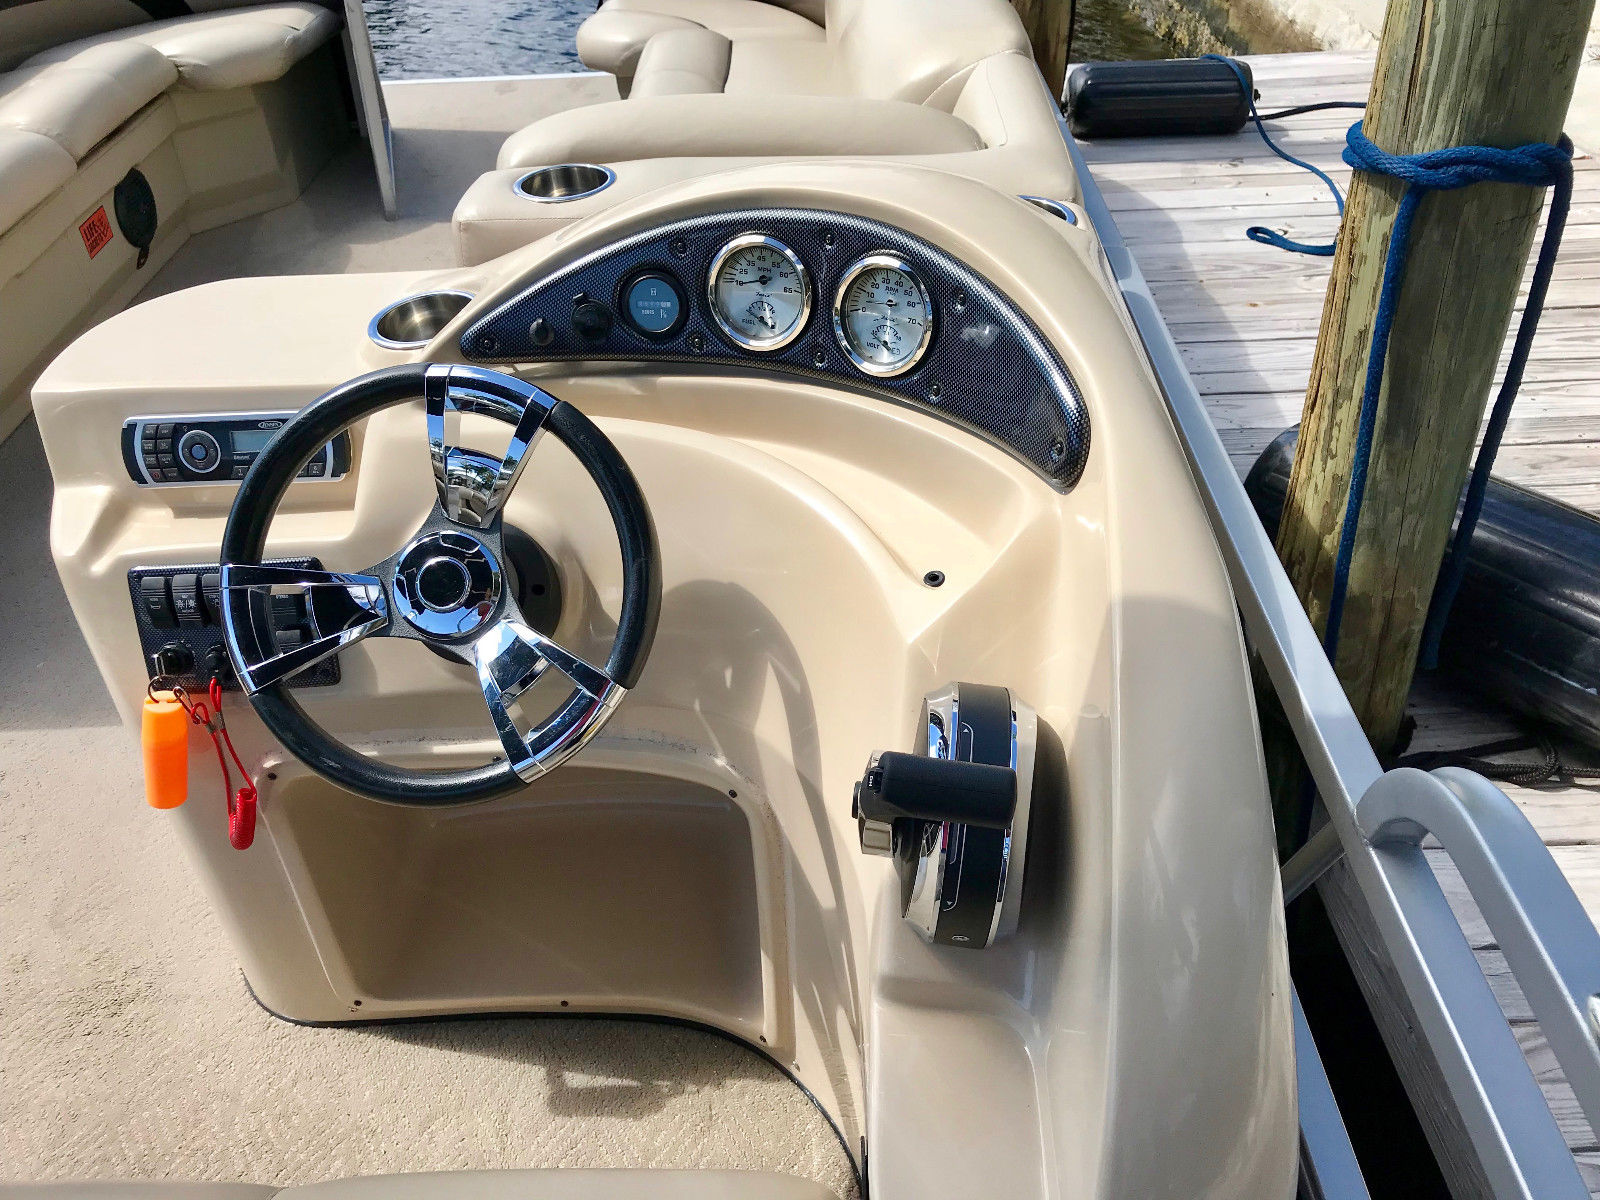 Bentley 240/243 Cruise Pontoon 2014 for sale for $16,900 - Boats-from ...